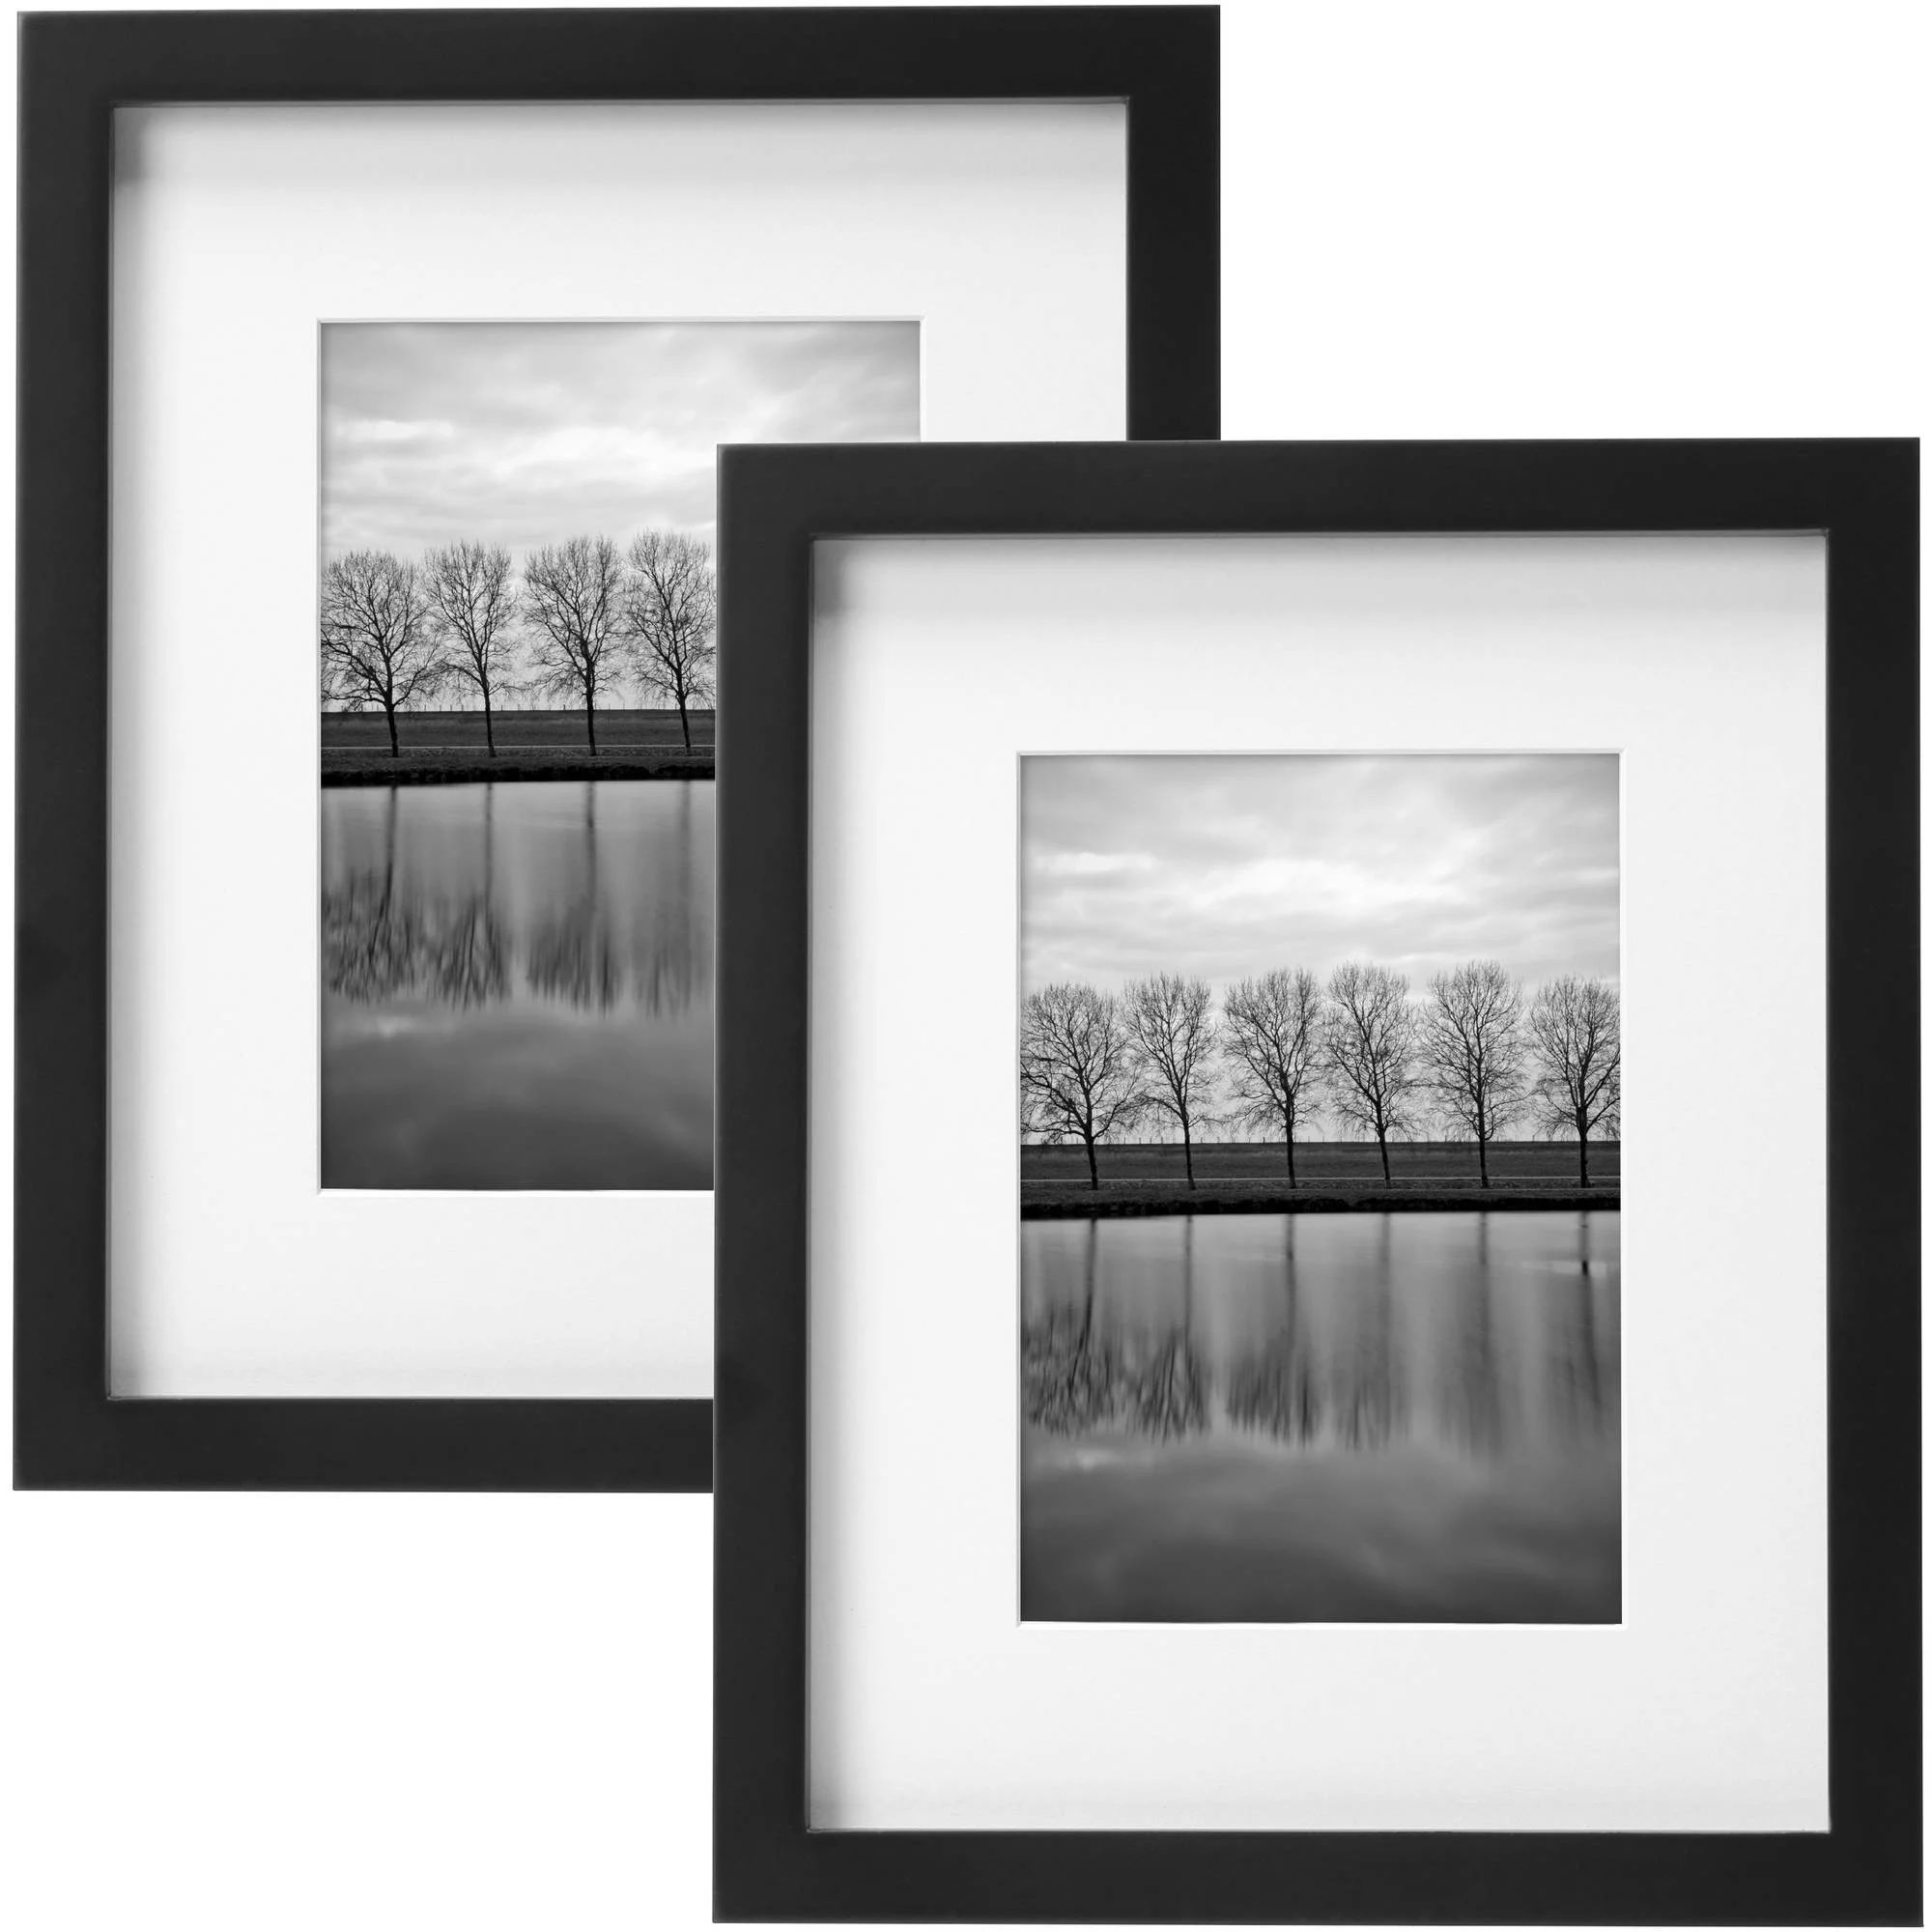 Better Homes & Gardens Gallery 8" x 10" Matted for 5" x 7" Picture Frame, Black, Set of 2 | Walmart (US)